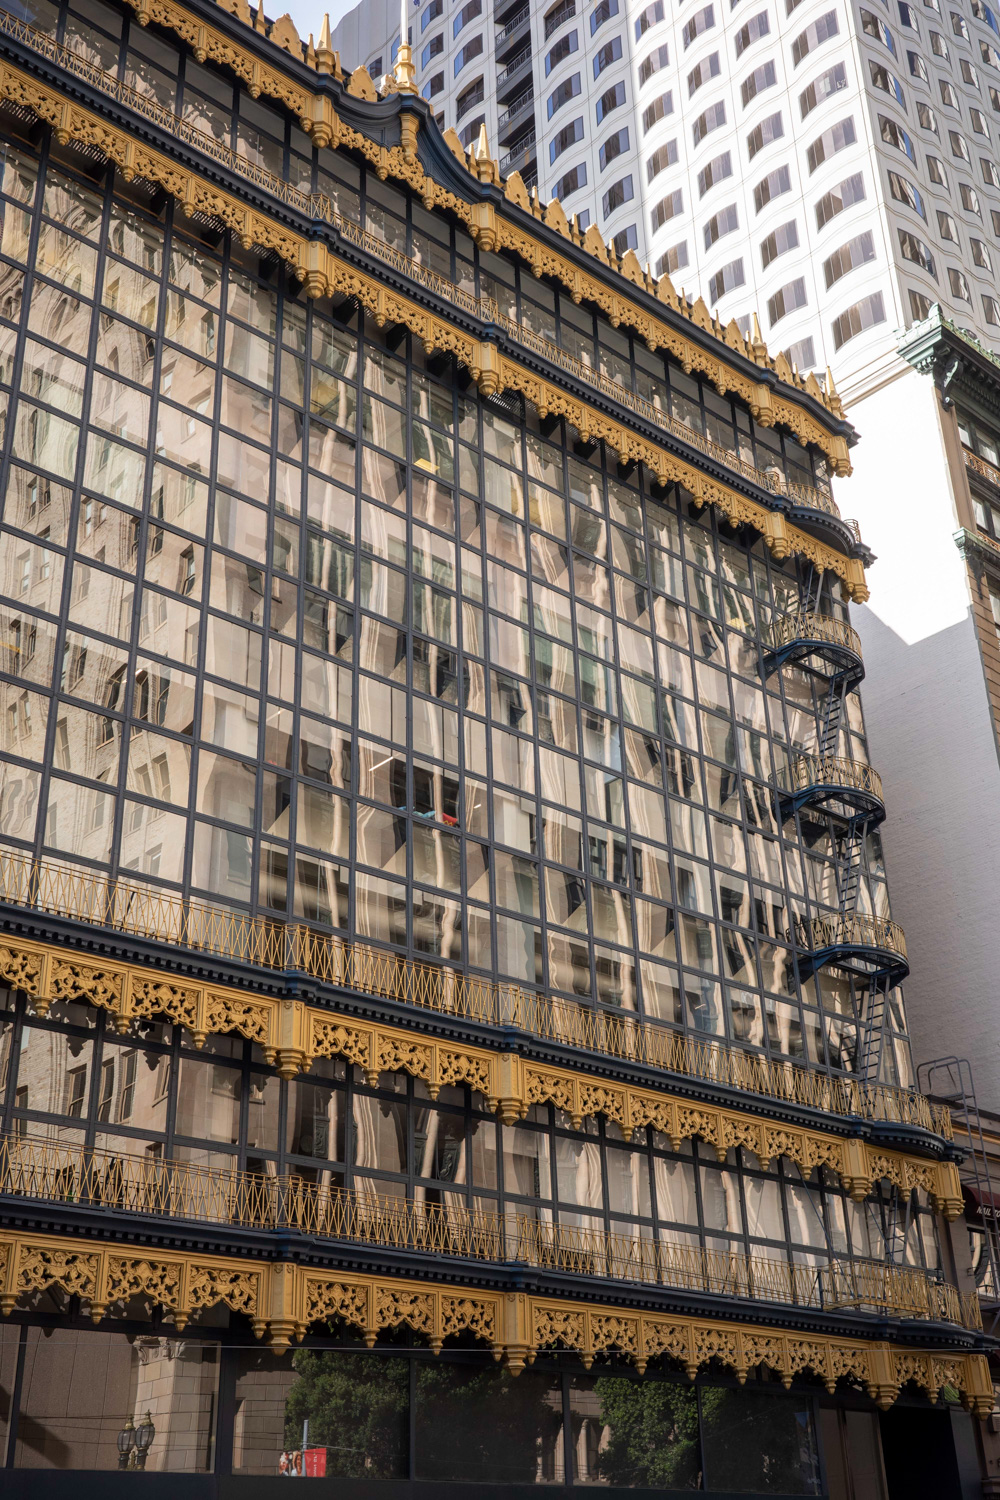 Hallidie Building, image by author